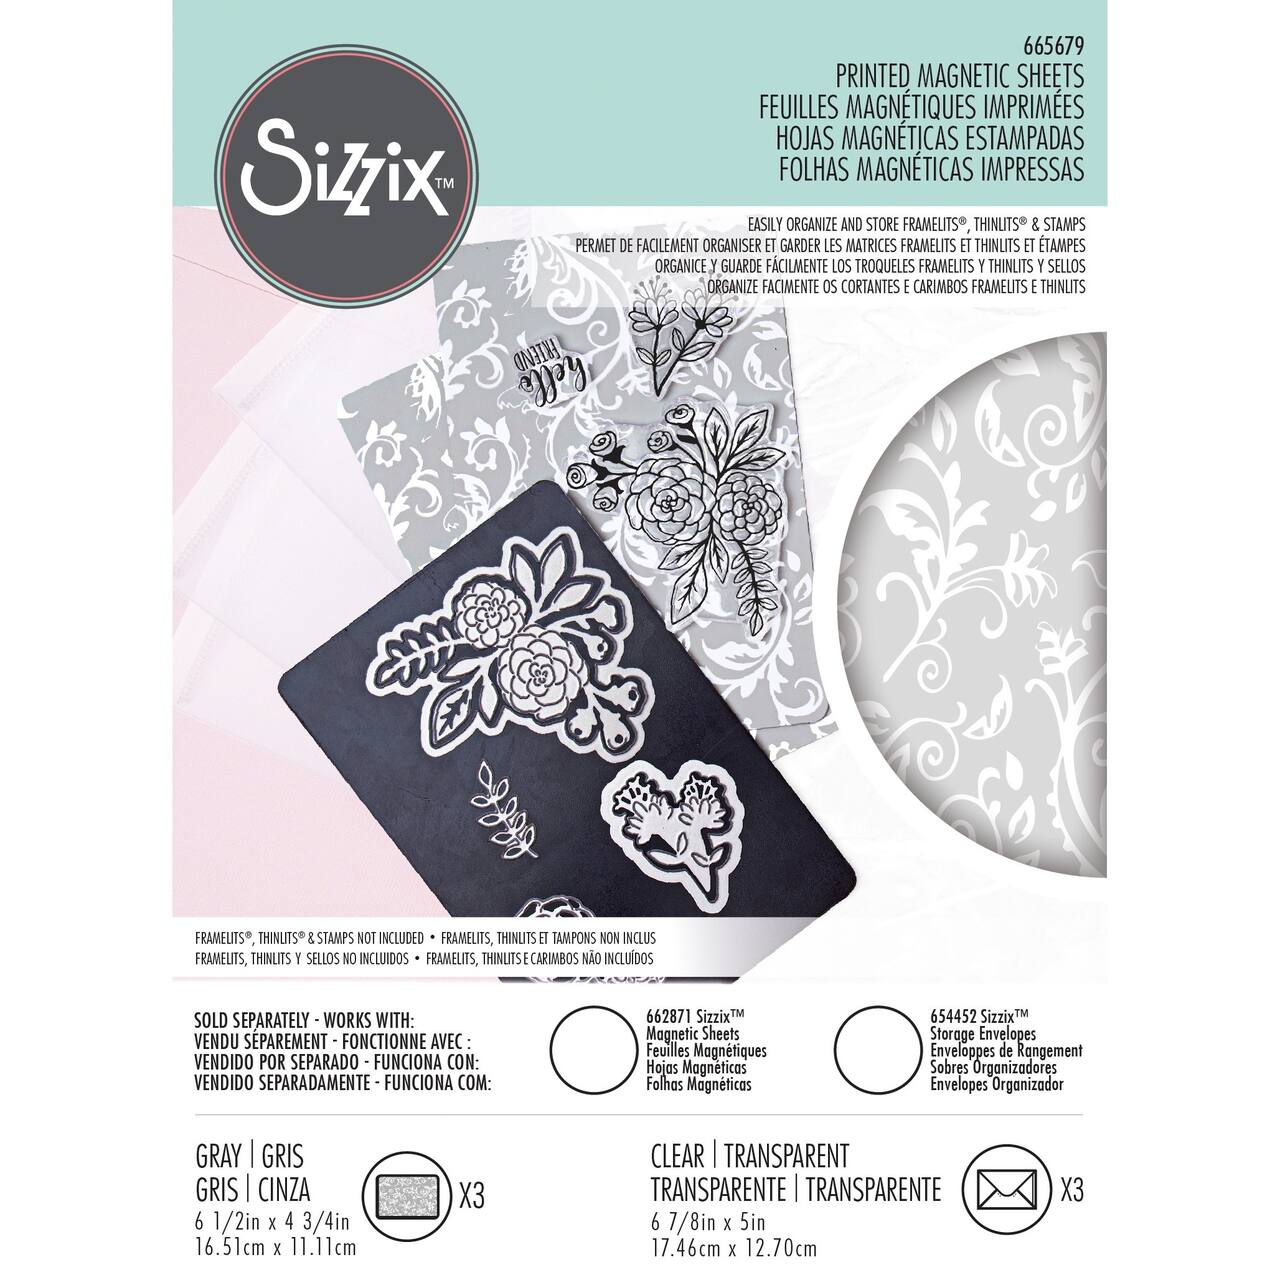 Sizzix™ Printed Magnetic Sheets with Envelopes